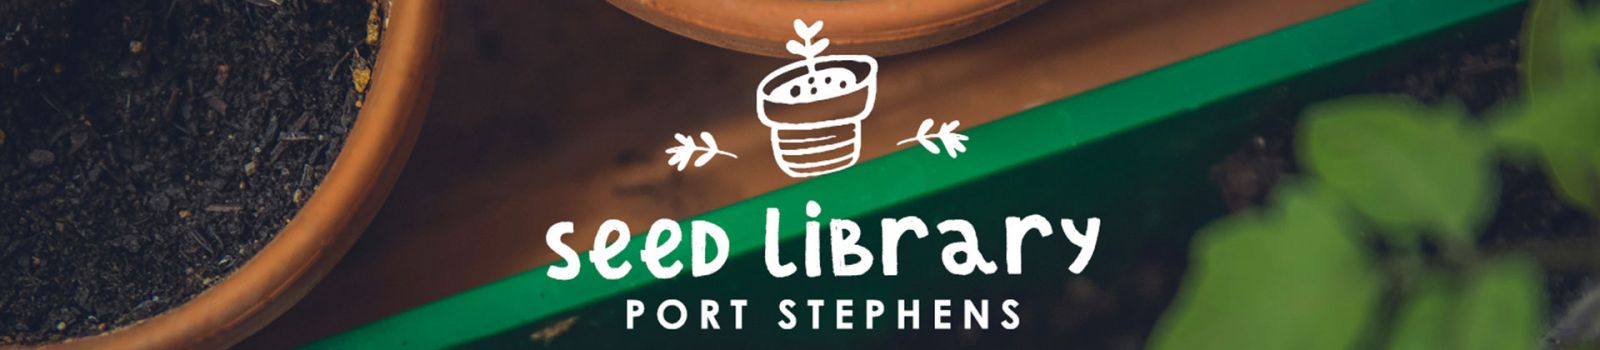 Image of seedings in pots with Seed Library logo  banner image